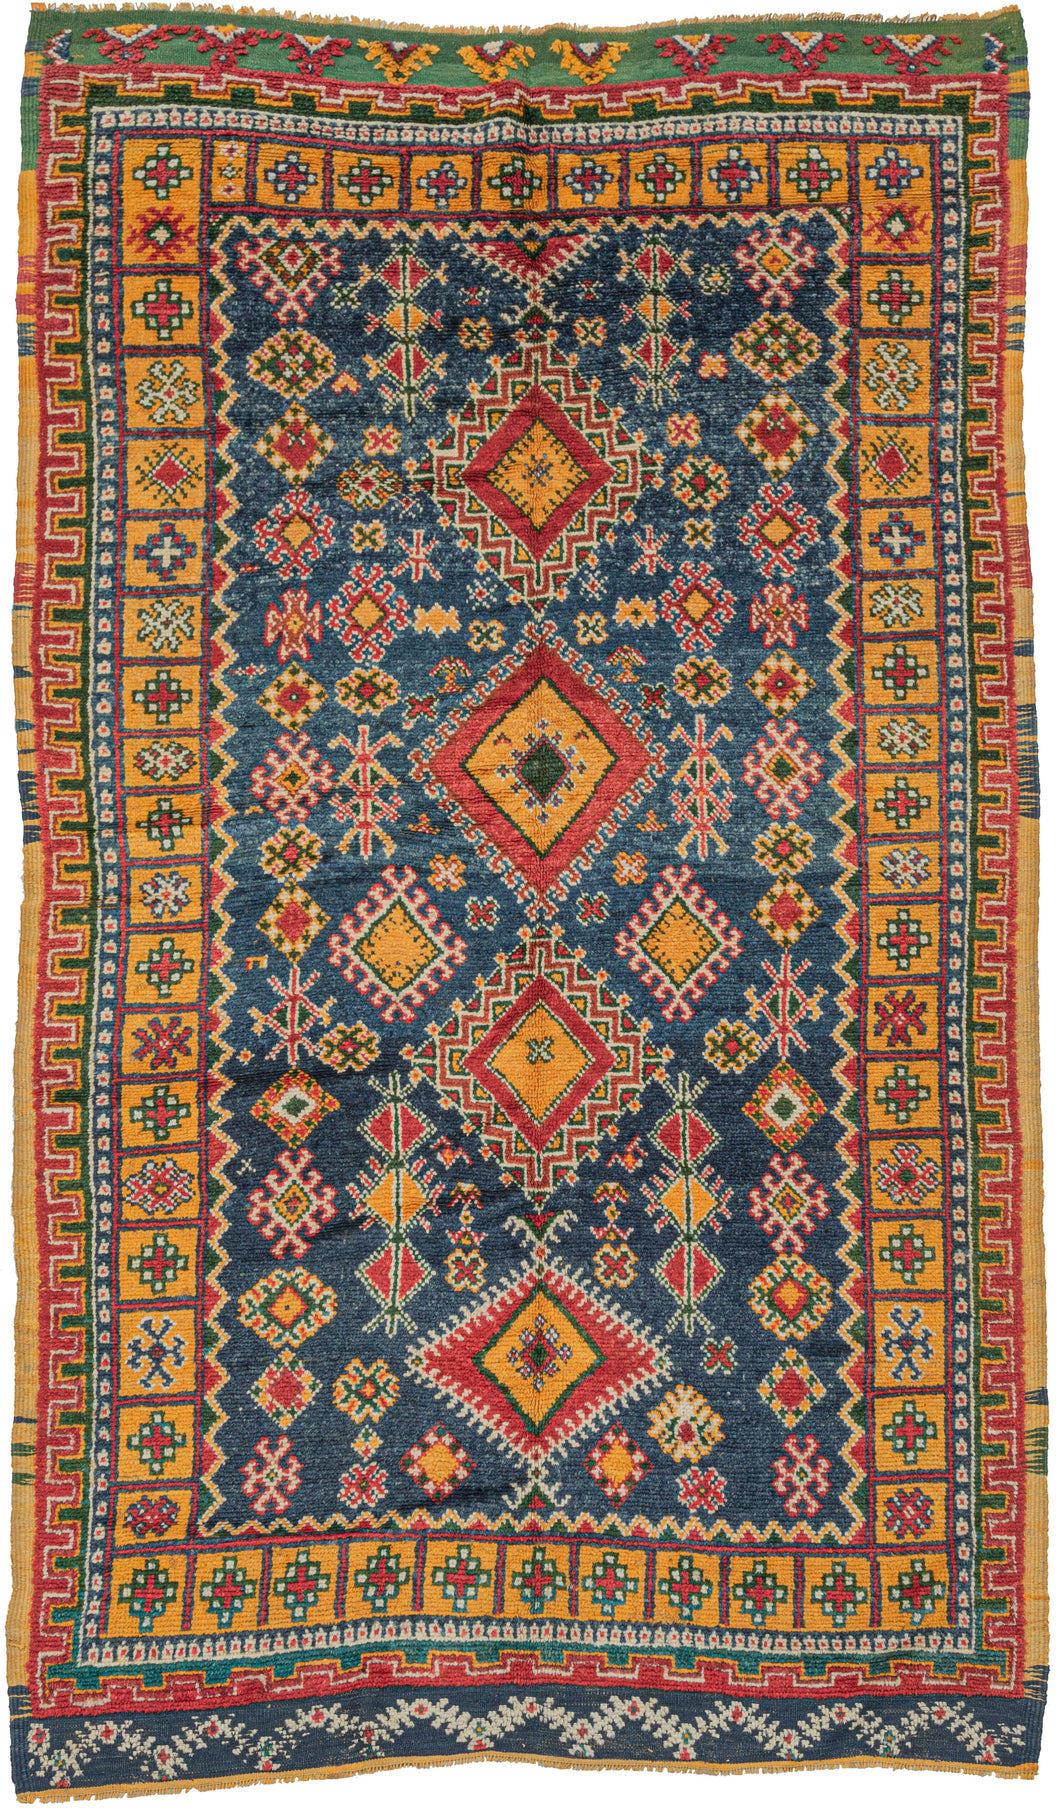 Midcentury Moroccan Taznakt kelleghi area rug featuring a field filled with various protection symbols and a central axis of powerful diamonds on rich Mediterranean blue ground. The spectacular blue contrasts perfectly with rich red, saffron yellow, and emerald green with ivory accents. Many of the protection symbols found in the field can be found in the wonderful main compartmentalized main border.